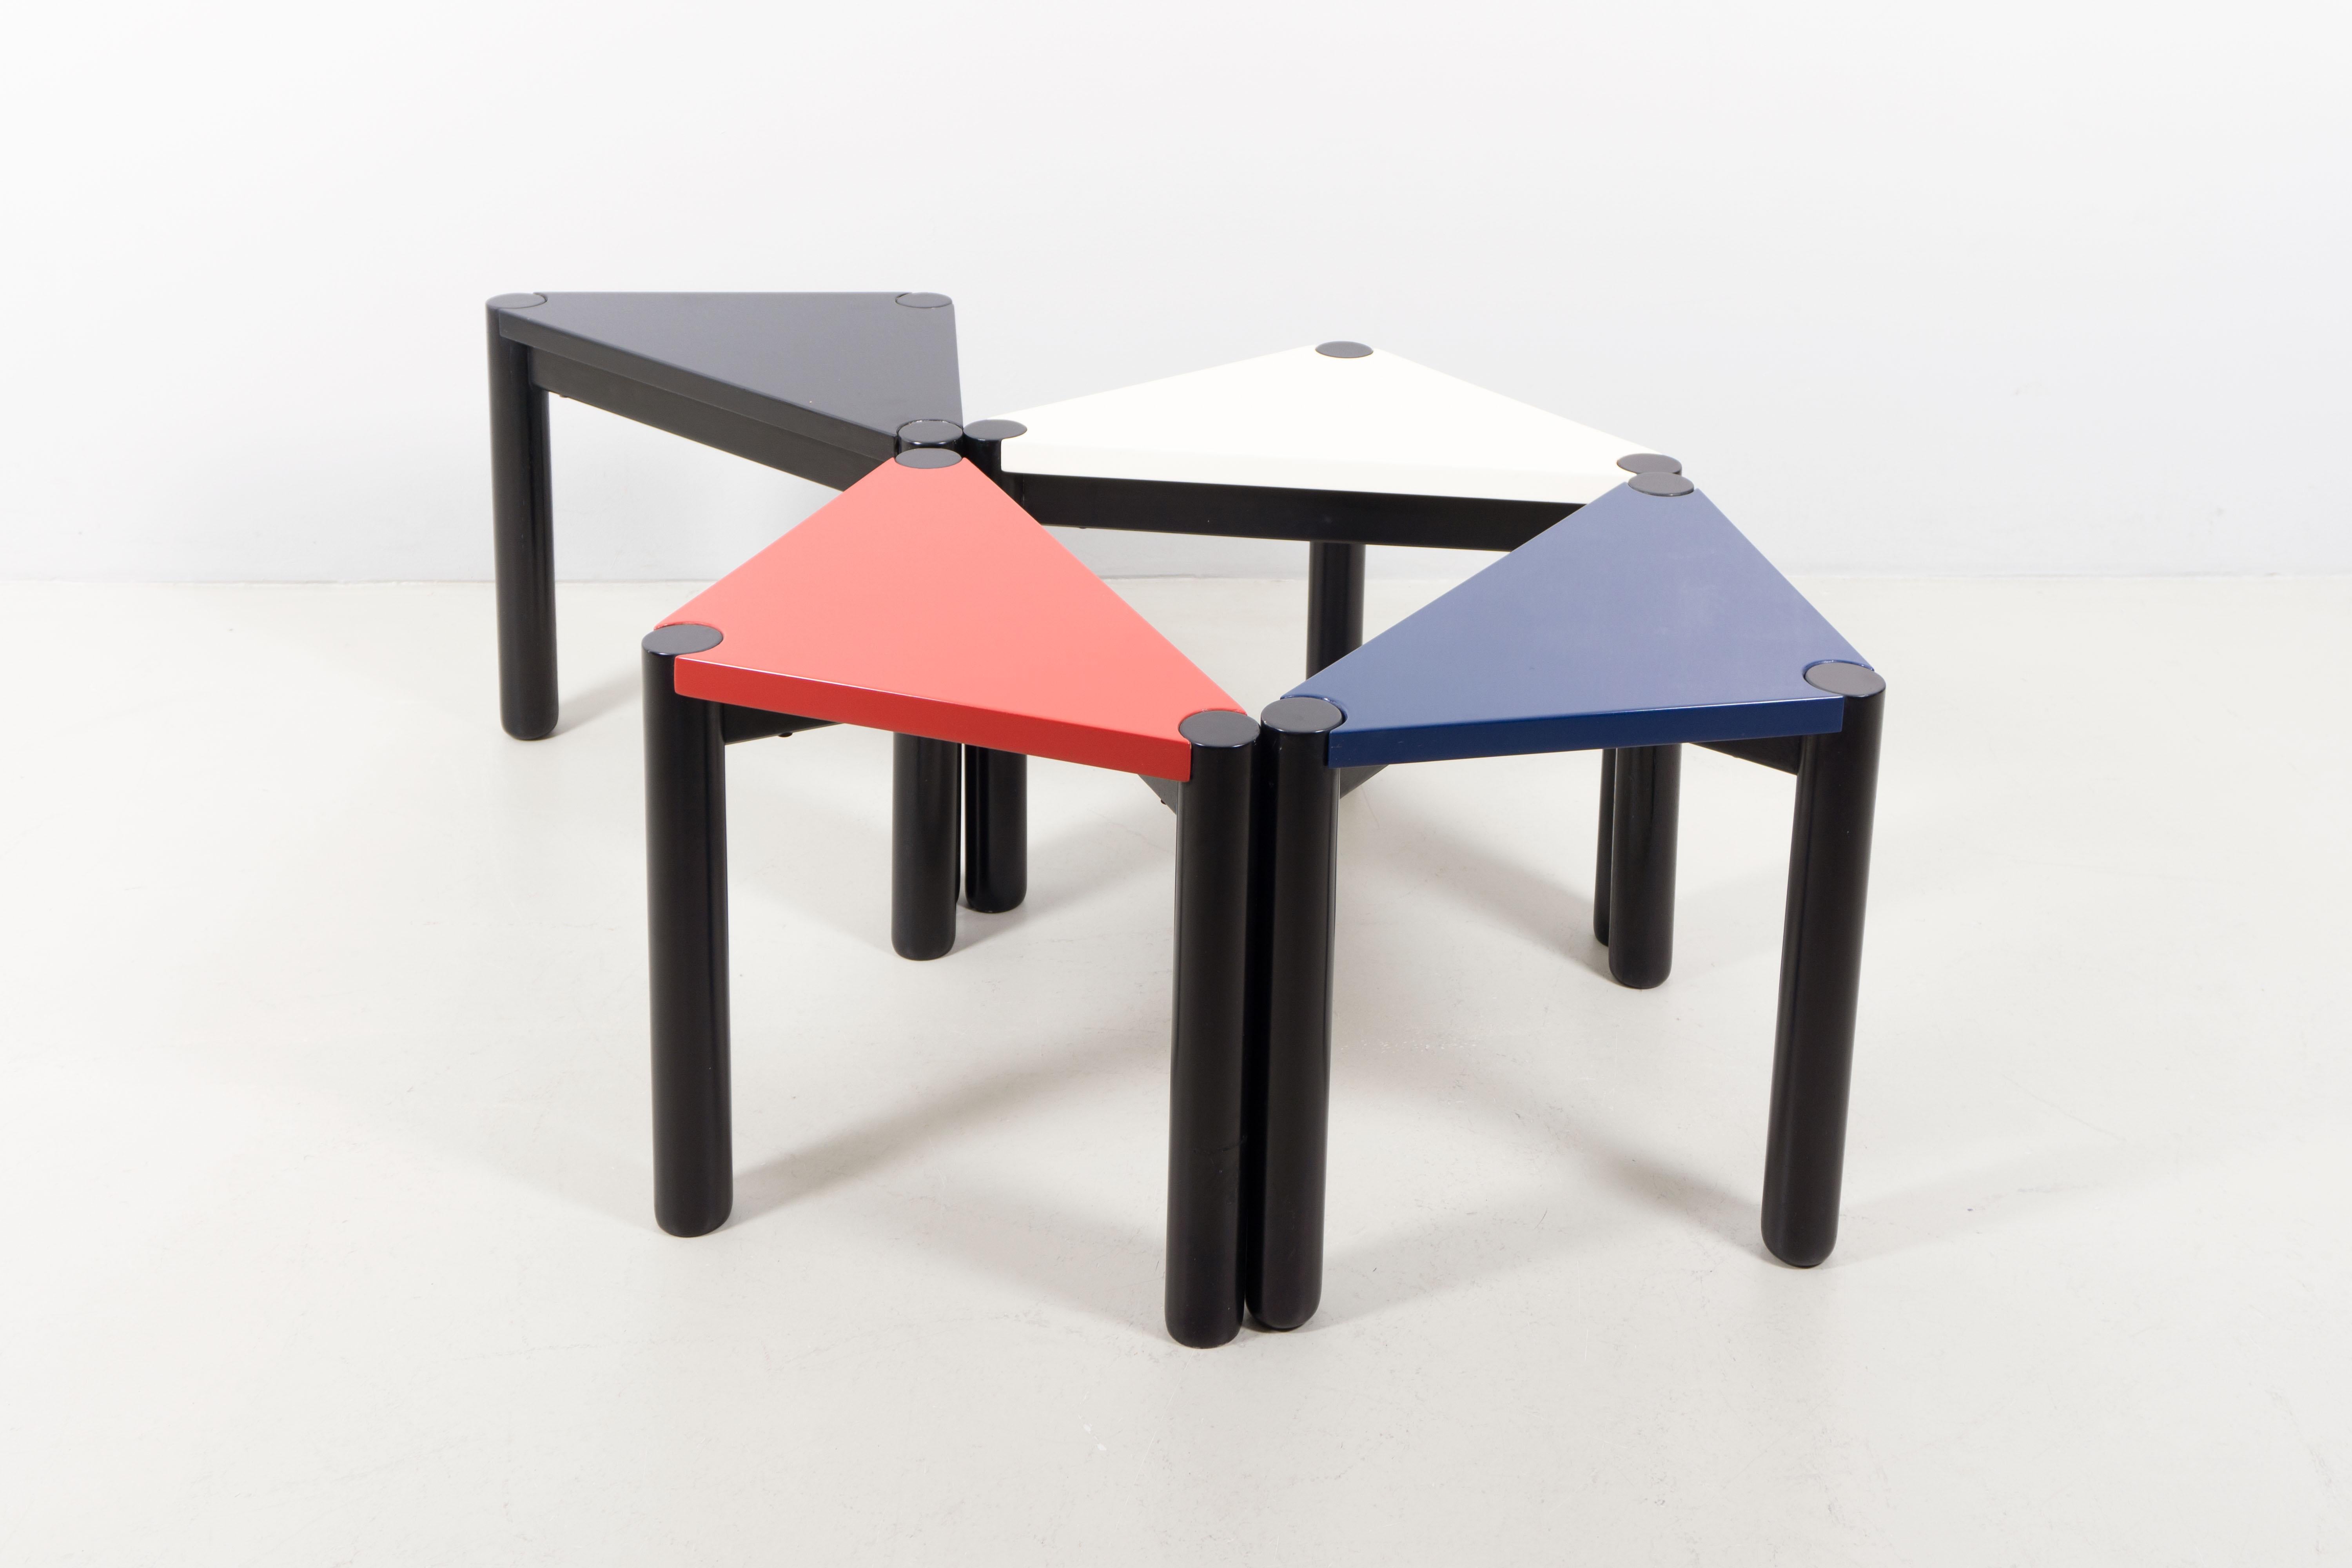 Four tables designed by Ico Parisi around year 1970. Each table is made of wood and lacquered in different colors: white, red, marine and black. Parisi unites playful and rational design with these tables. They invite users to play around with their